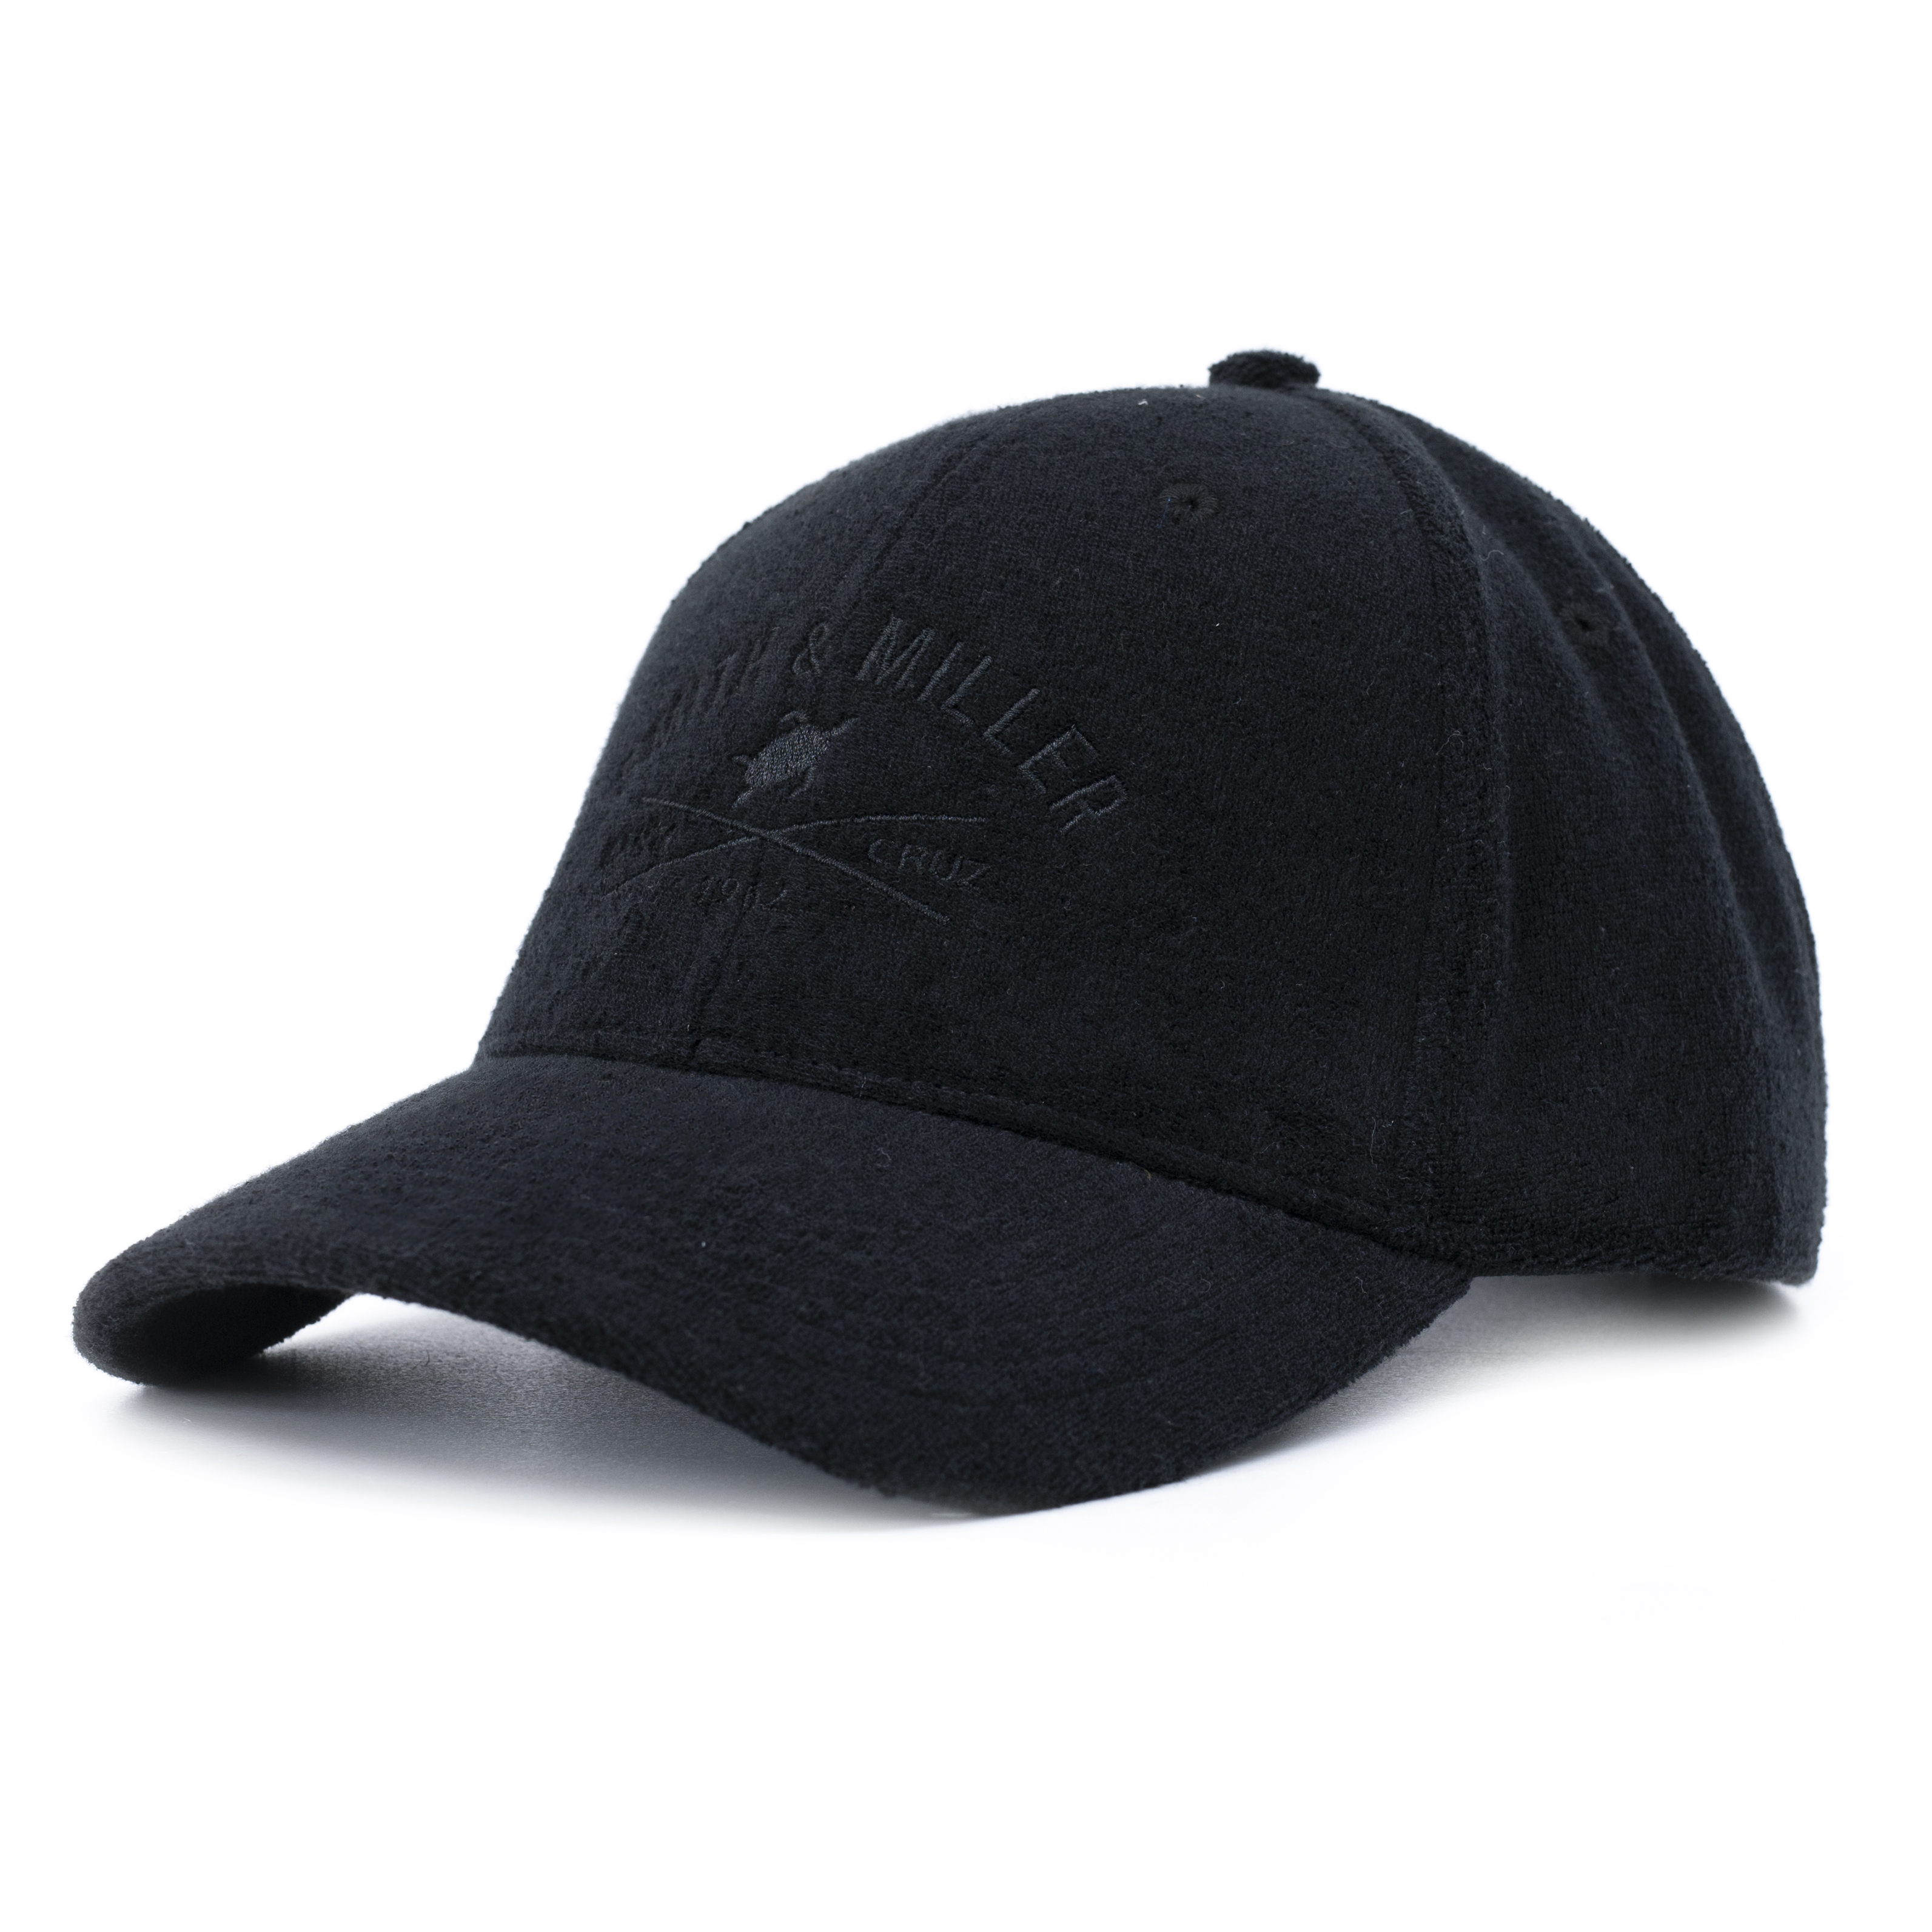 Smith & Miller Likely Curved Cap, black